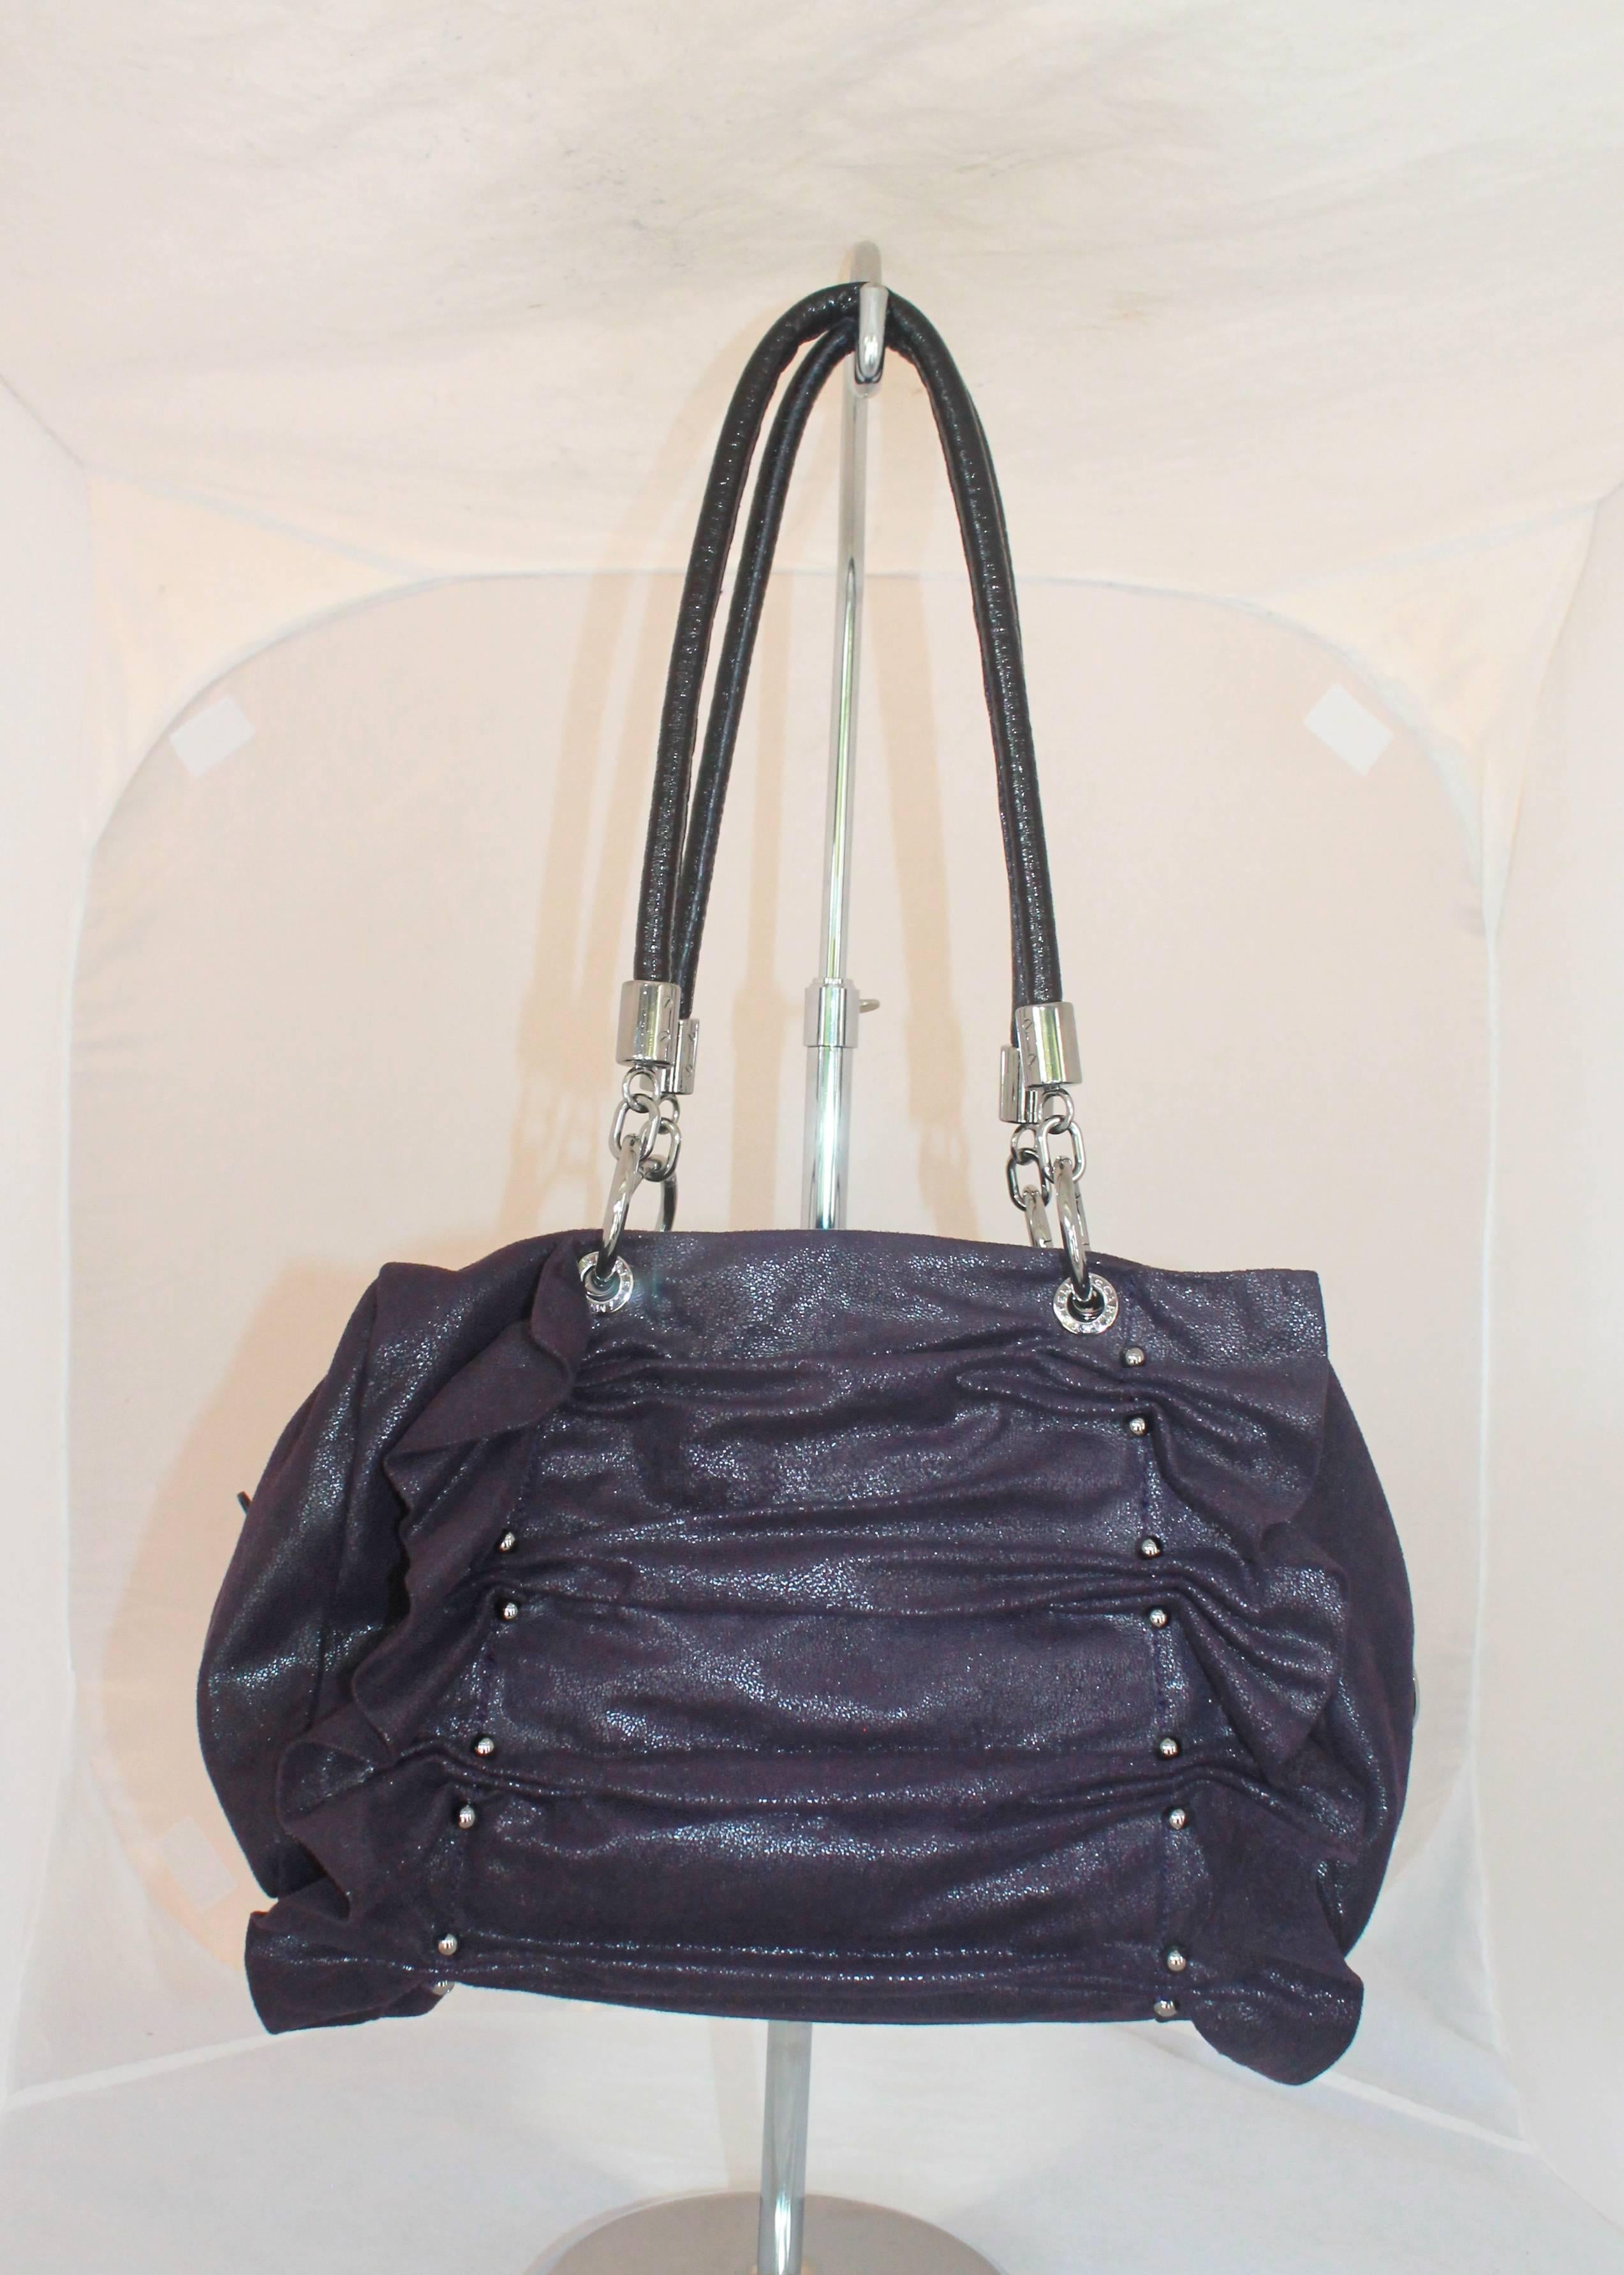 Stella McCartney Deep Purple Cracked Suede Ruched Shoulder Bag

This bag is in excellent condition. It has silver hardware with front and back ruching. It has silver studs and the bags fabric has a slight sheer look to it. Also comes with a coin